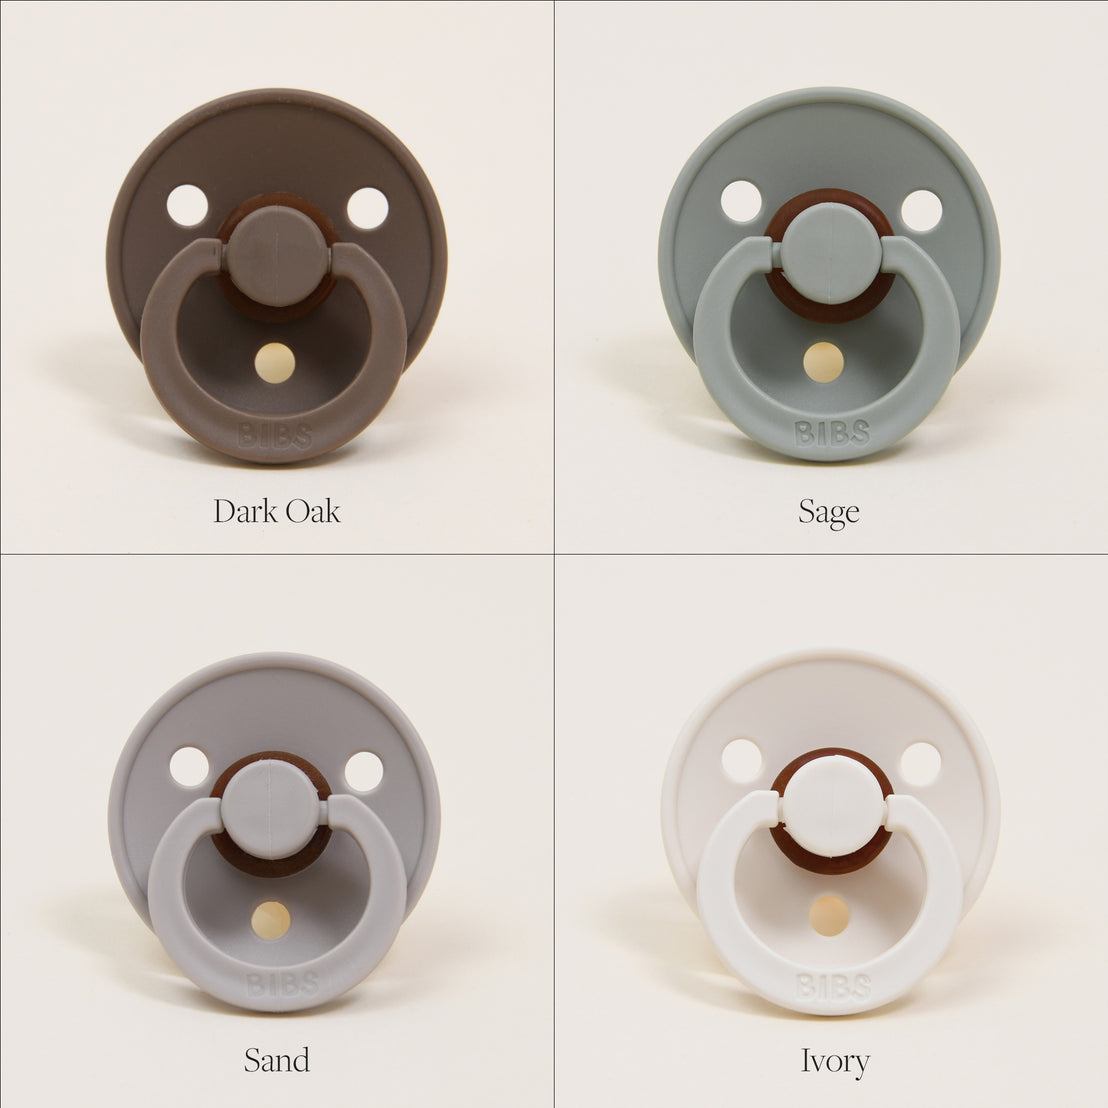 Four Bibs Pacifiers, designed in Denmark, in different colors labeled dark oak, sage, sand, and ivory, each displayed against a plain cream background.